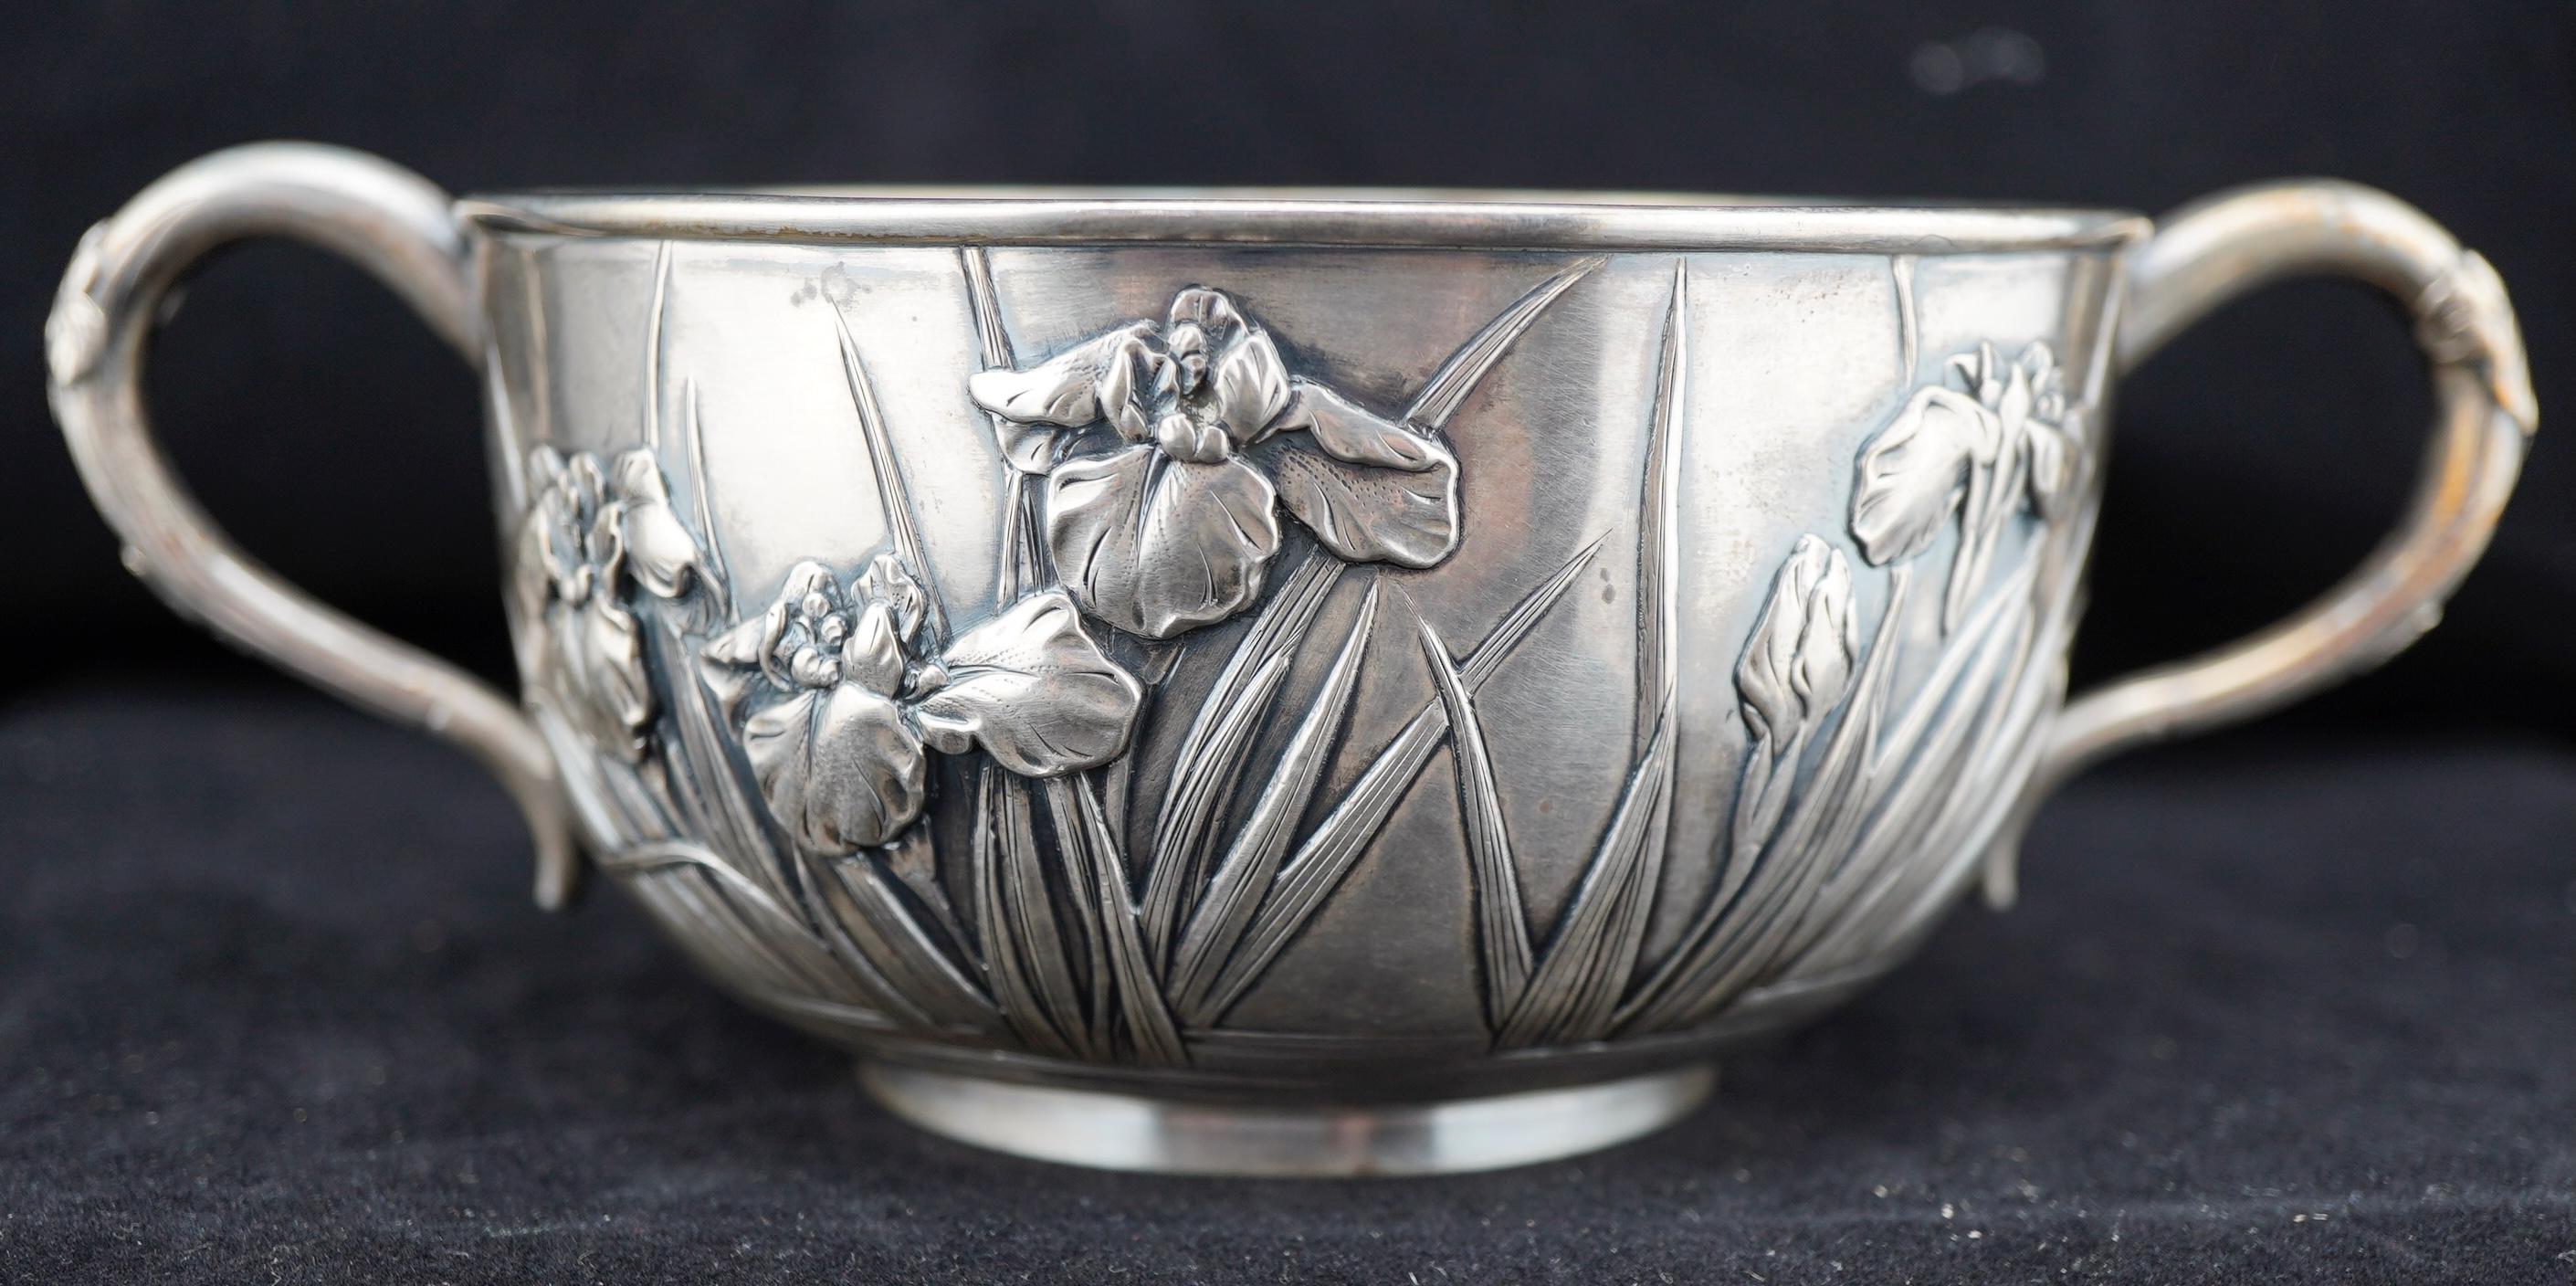 Japanese silver bowl with handles by Konike. Finely decorated with repousse irises and cast floral handles. Marked on the bottom for the maker.
Weight 272 g or 8.7 t.oz